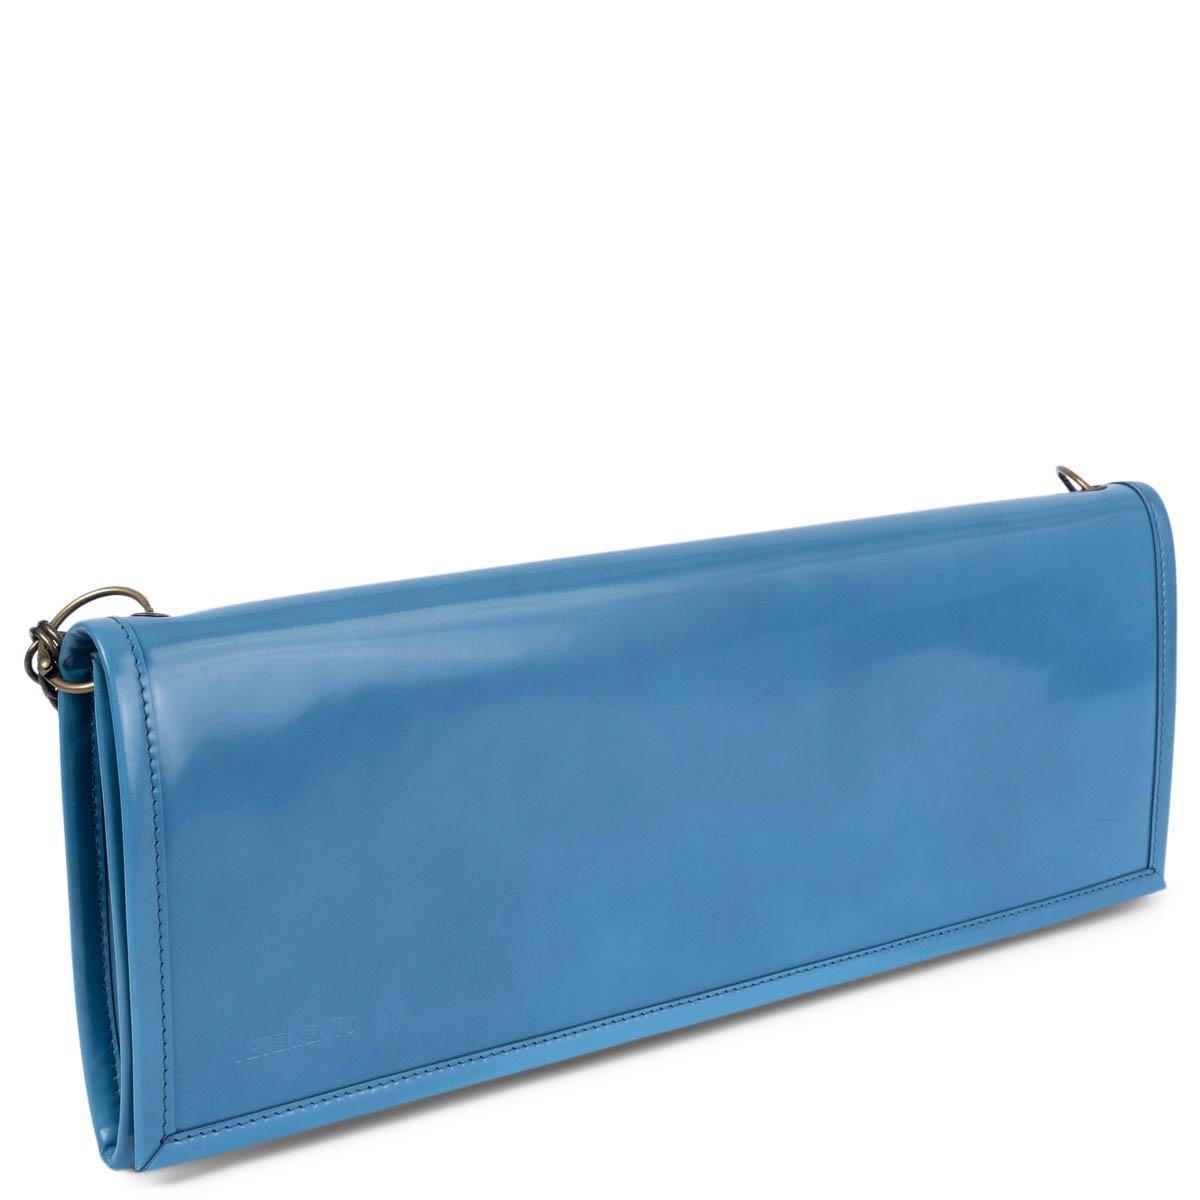 100% authentic Vetements x Eastpak 2017 Chain Clutch in smooth glossy aqua blue leather with exaggerated width. Features fold-over flap closure is secured by two magnetic snaps, one at either side. Includes extra wide round chunky antique gold-tone